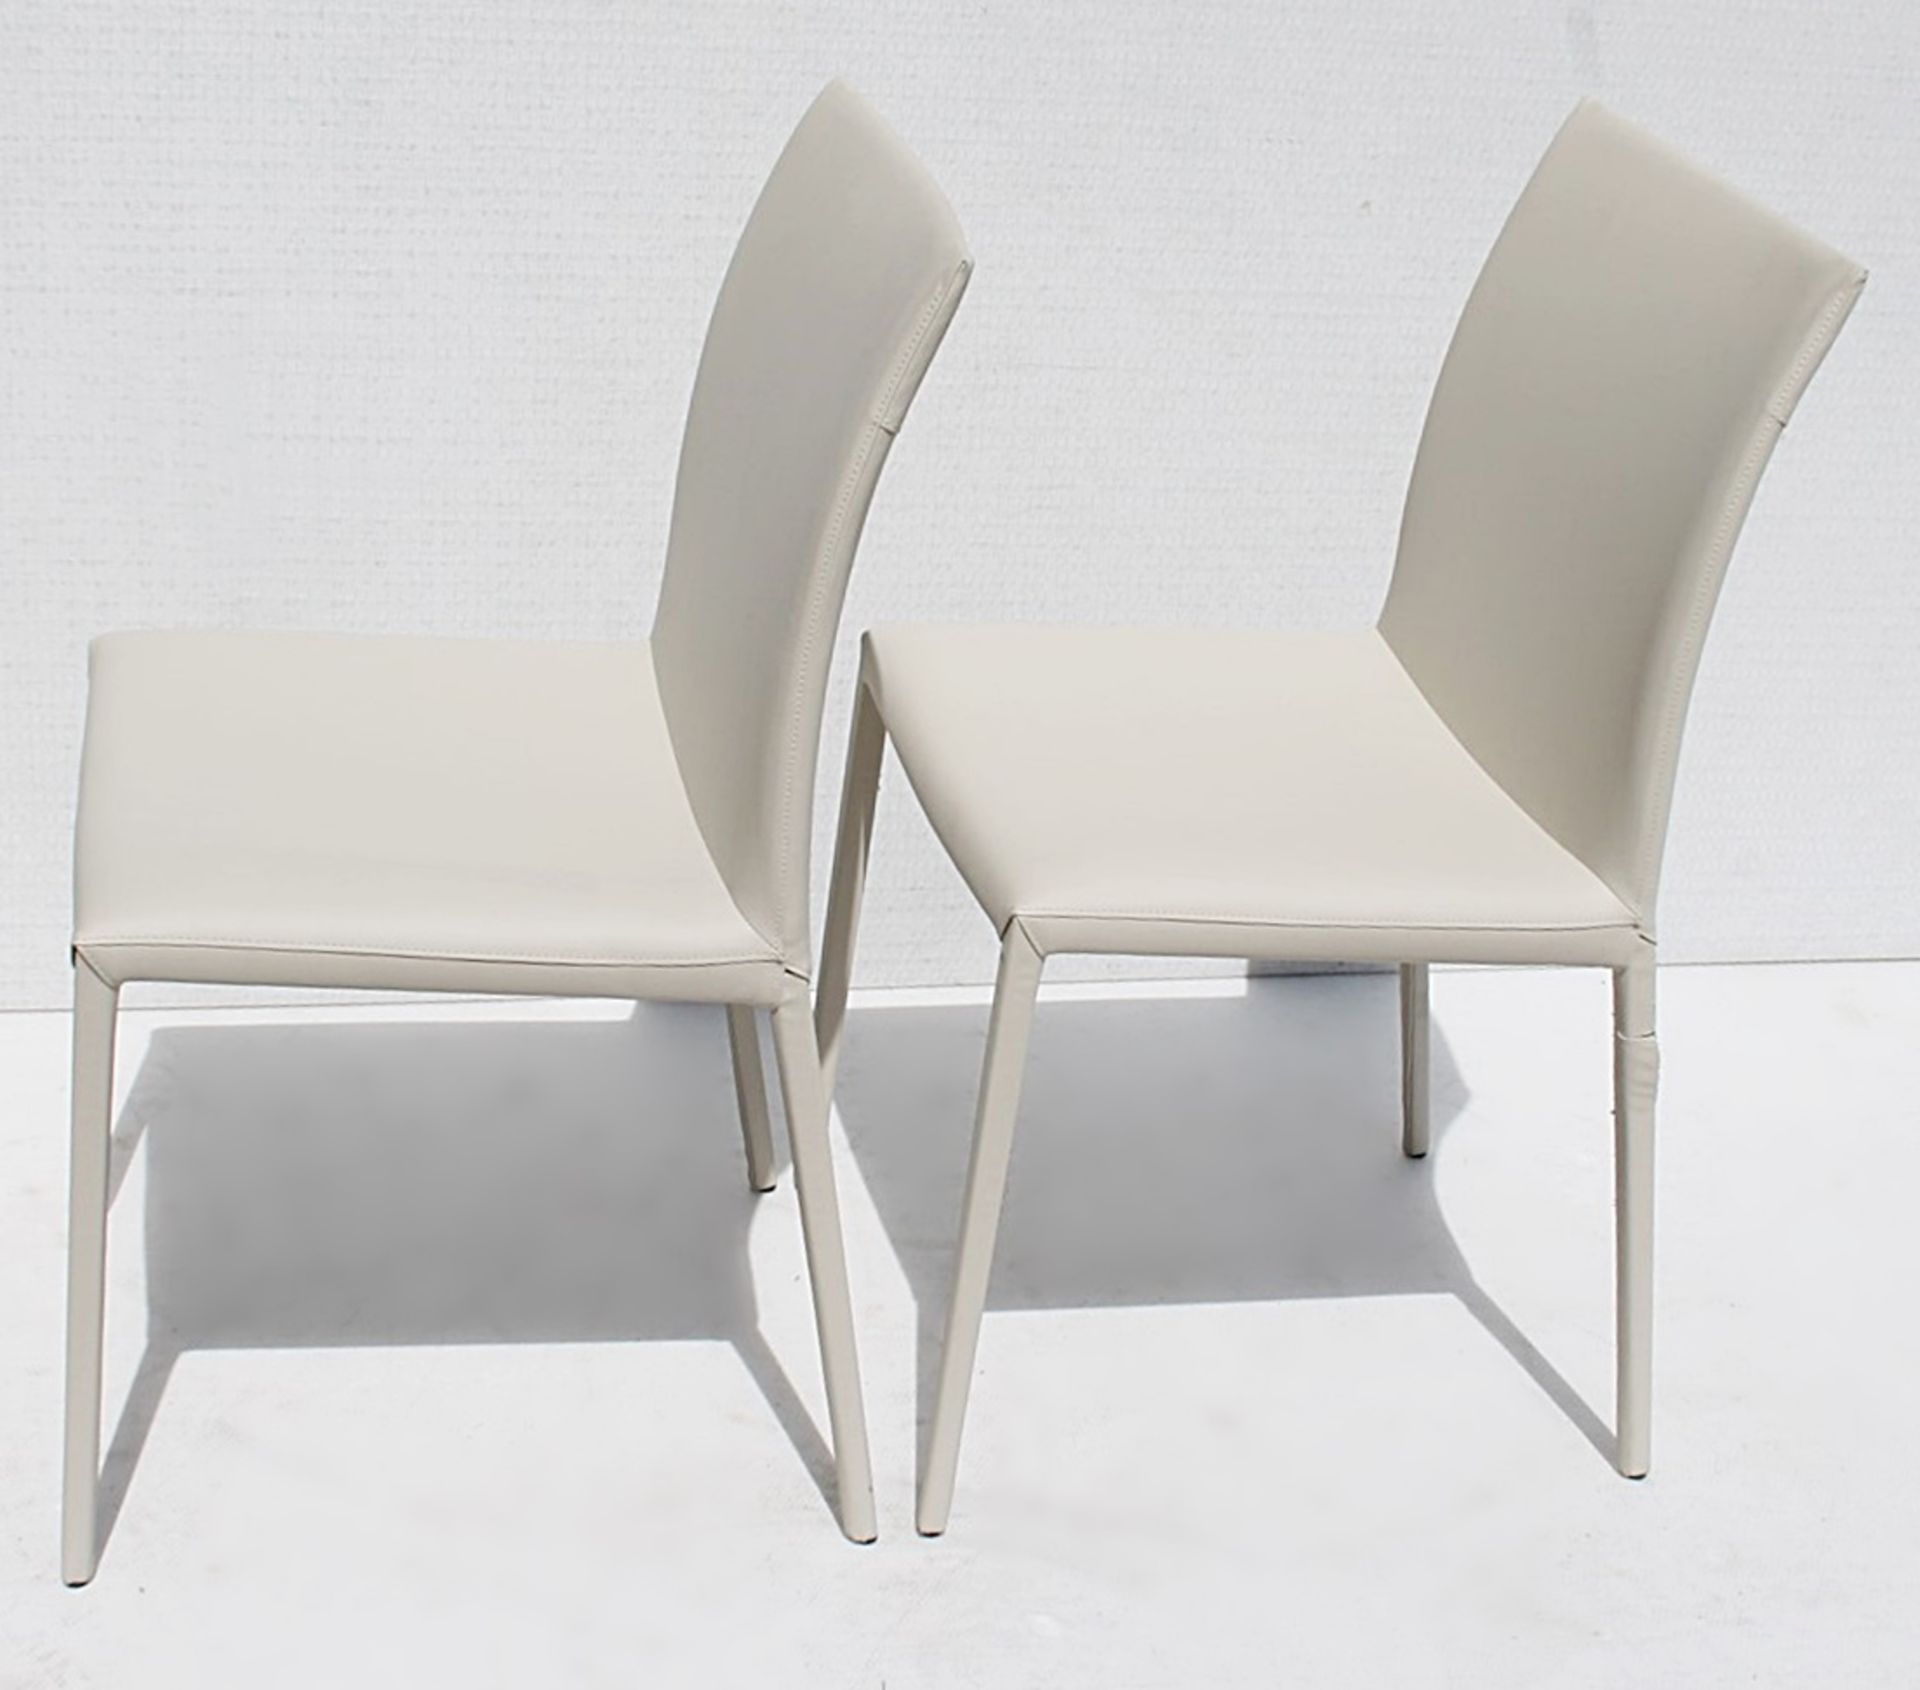 Pair Of CATELLAN 'Norma' Designer Italian Leather Barstools With Curved Backs In A Pale Taupe - - Image 4 of 6